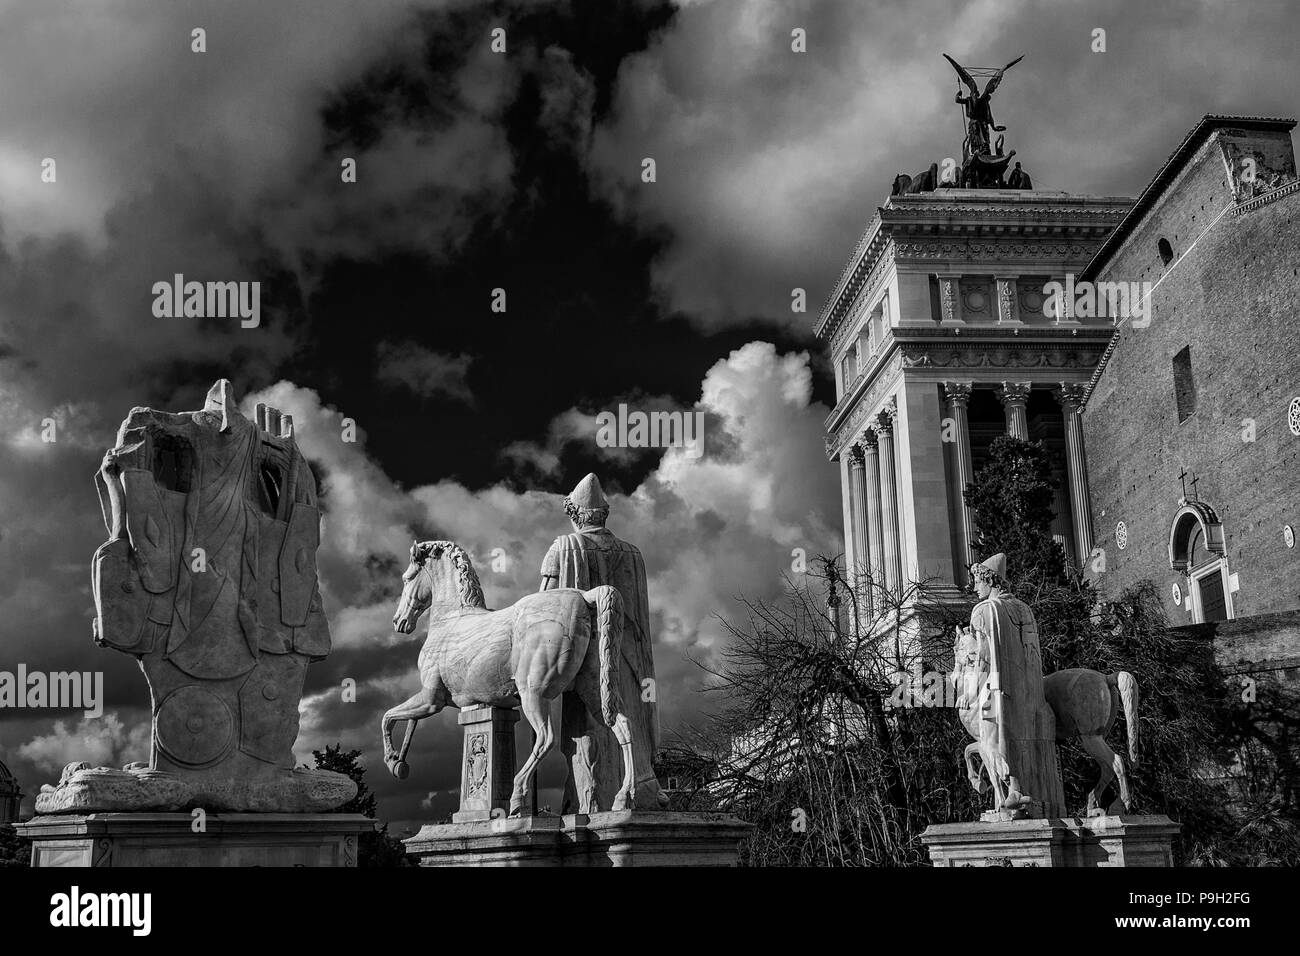 Capitoline Hill monumental balustrade with ancient roman statues and clouds in the historic center of Rome (Black and White) Stock Photo